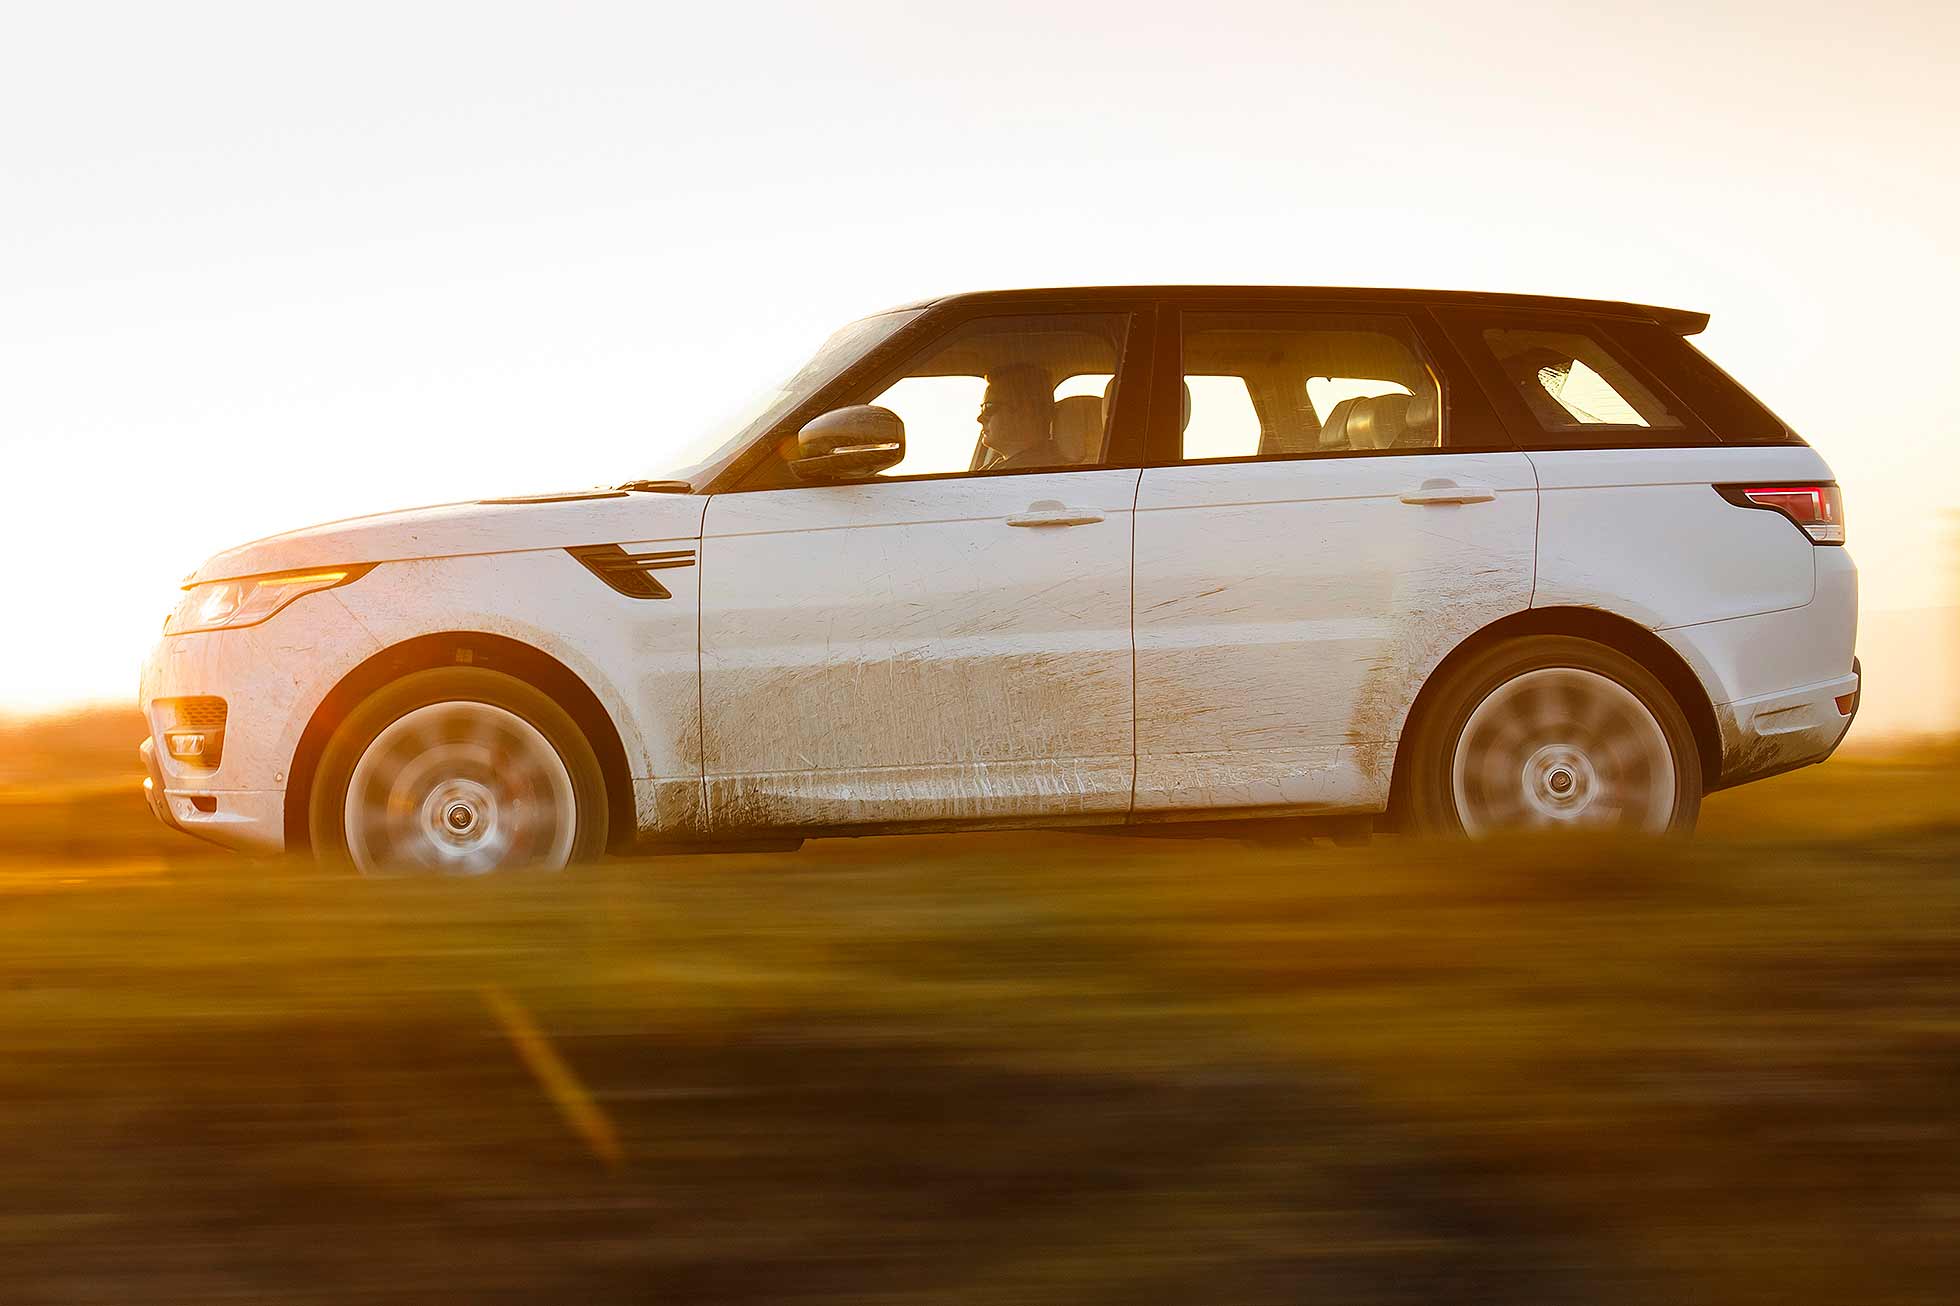 Range Rover Sport Supercharged (2015)